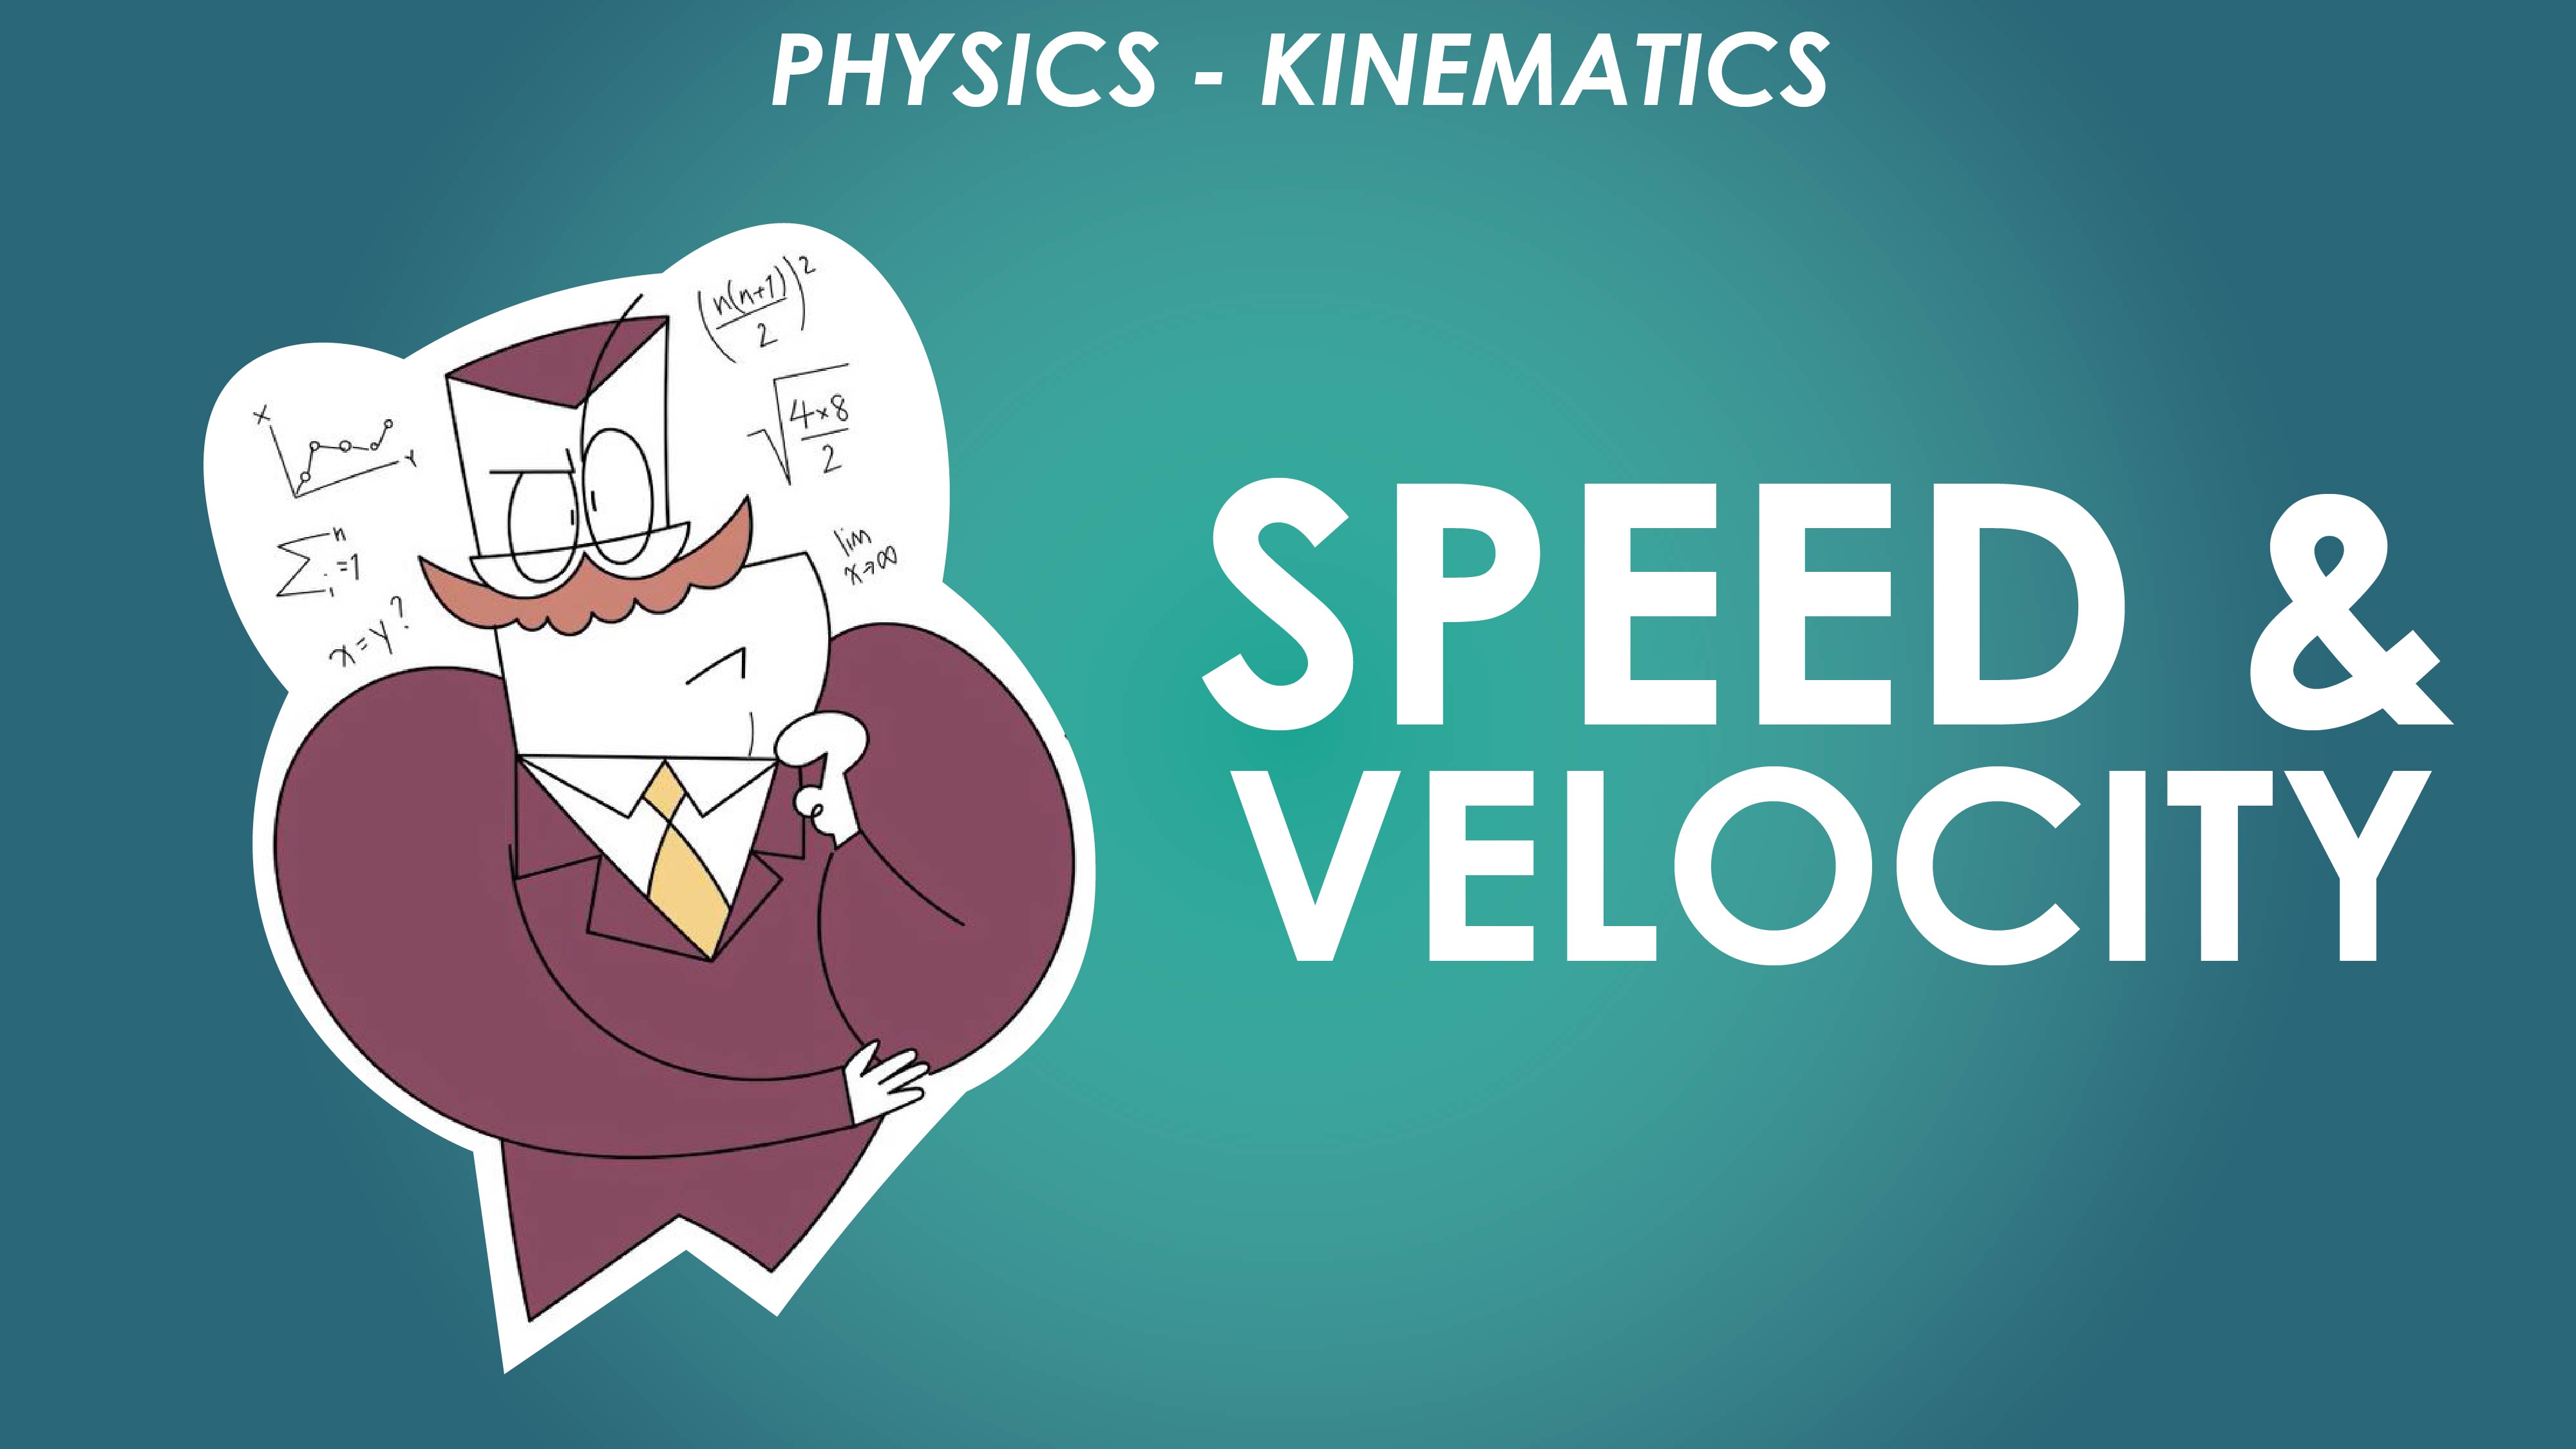 Speed and Velocity - Motion in a Straight Line